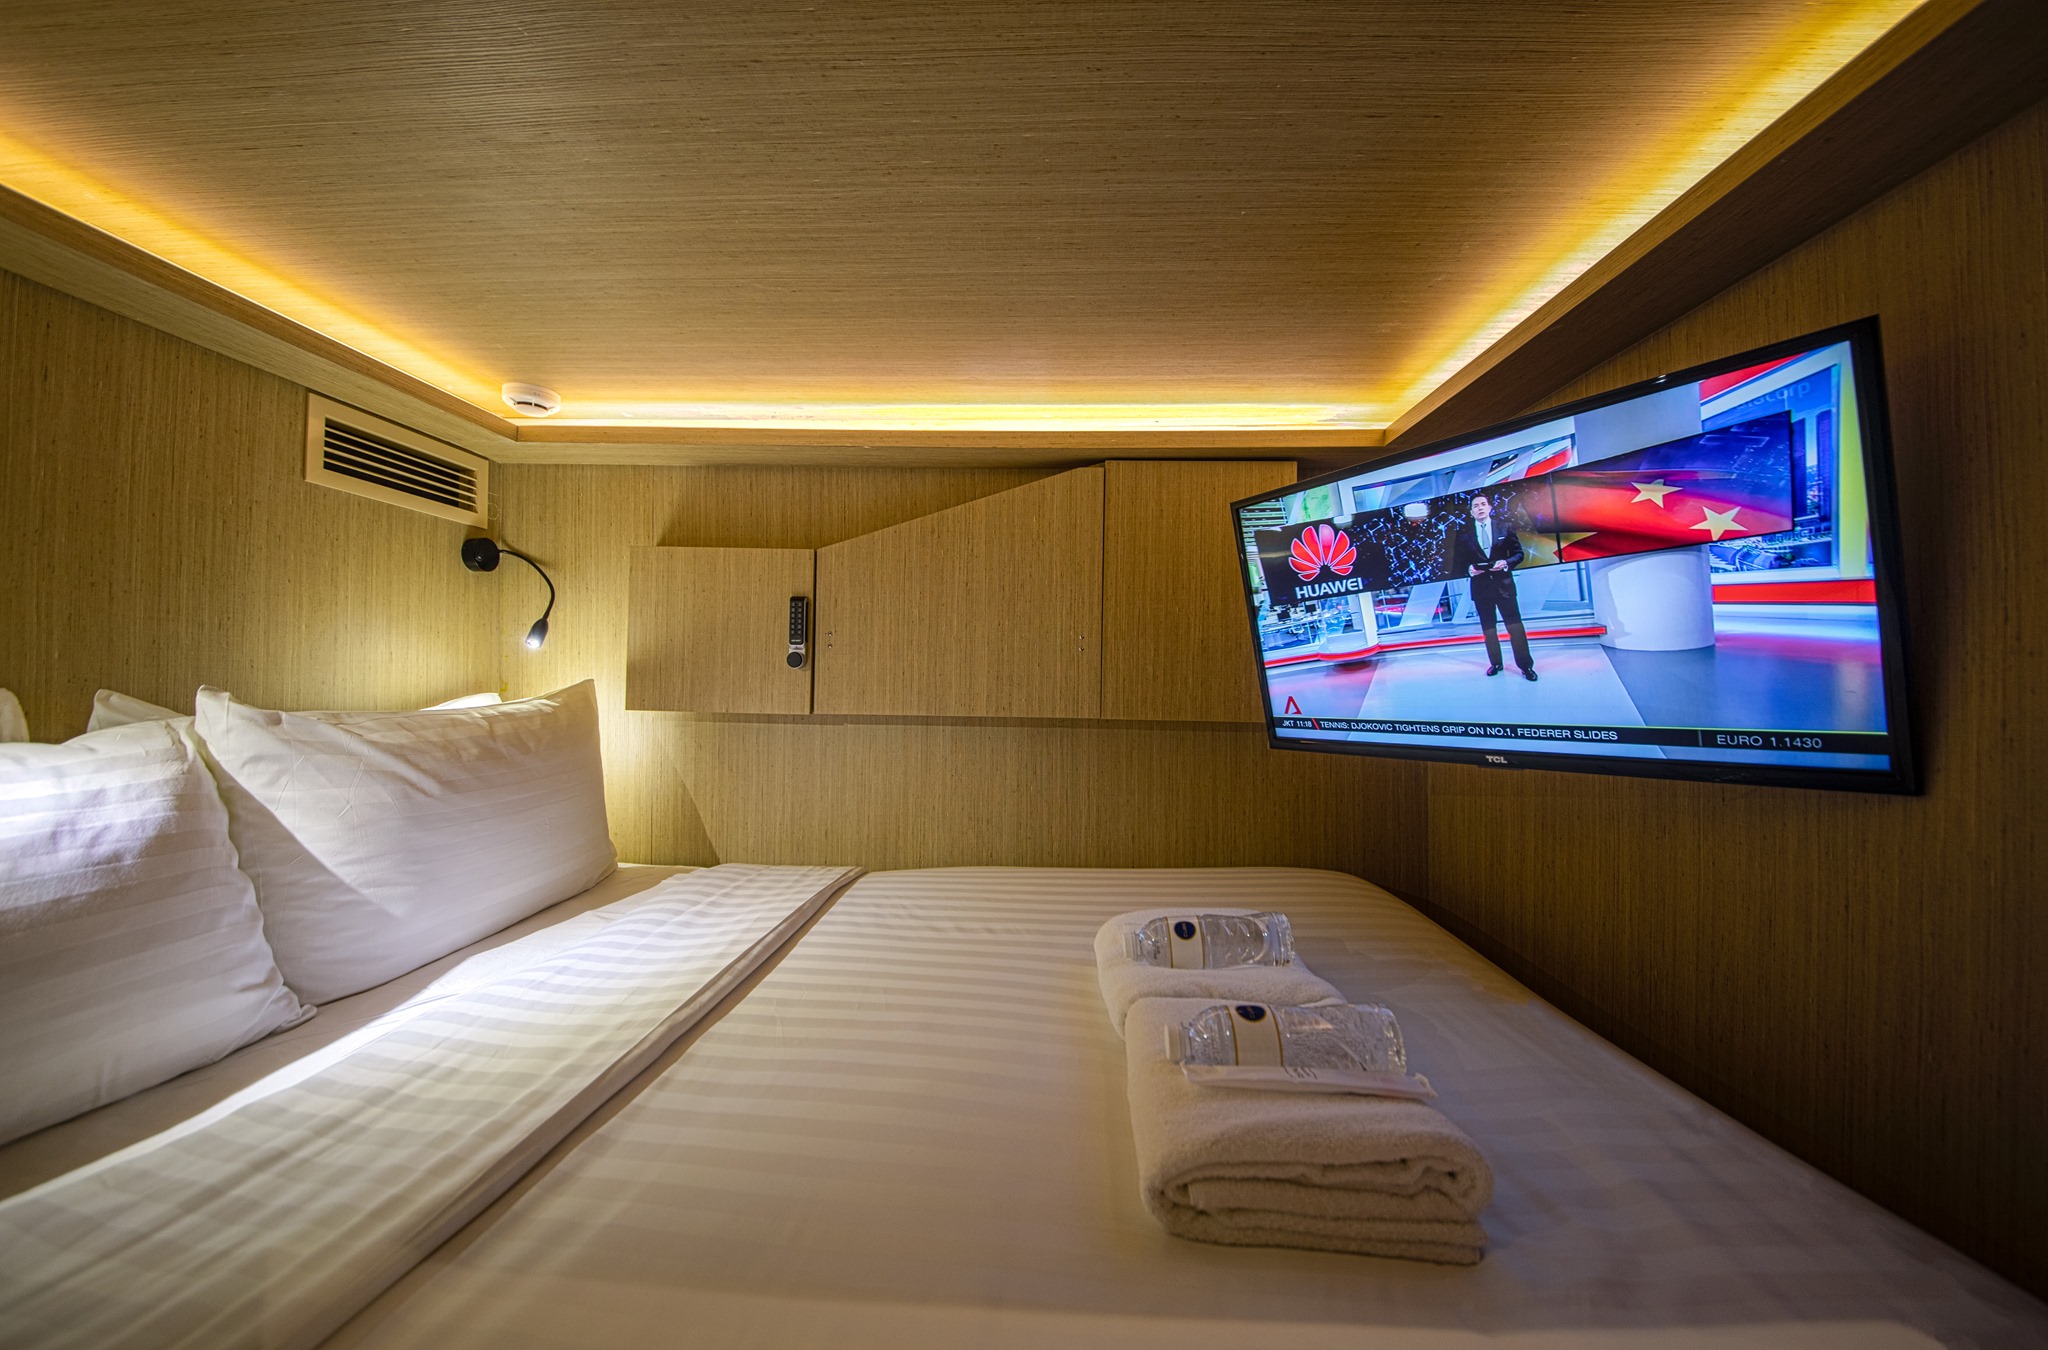 Cube Boutique Capsule Hotels - Kampong Glam queen capsule